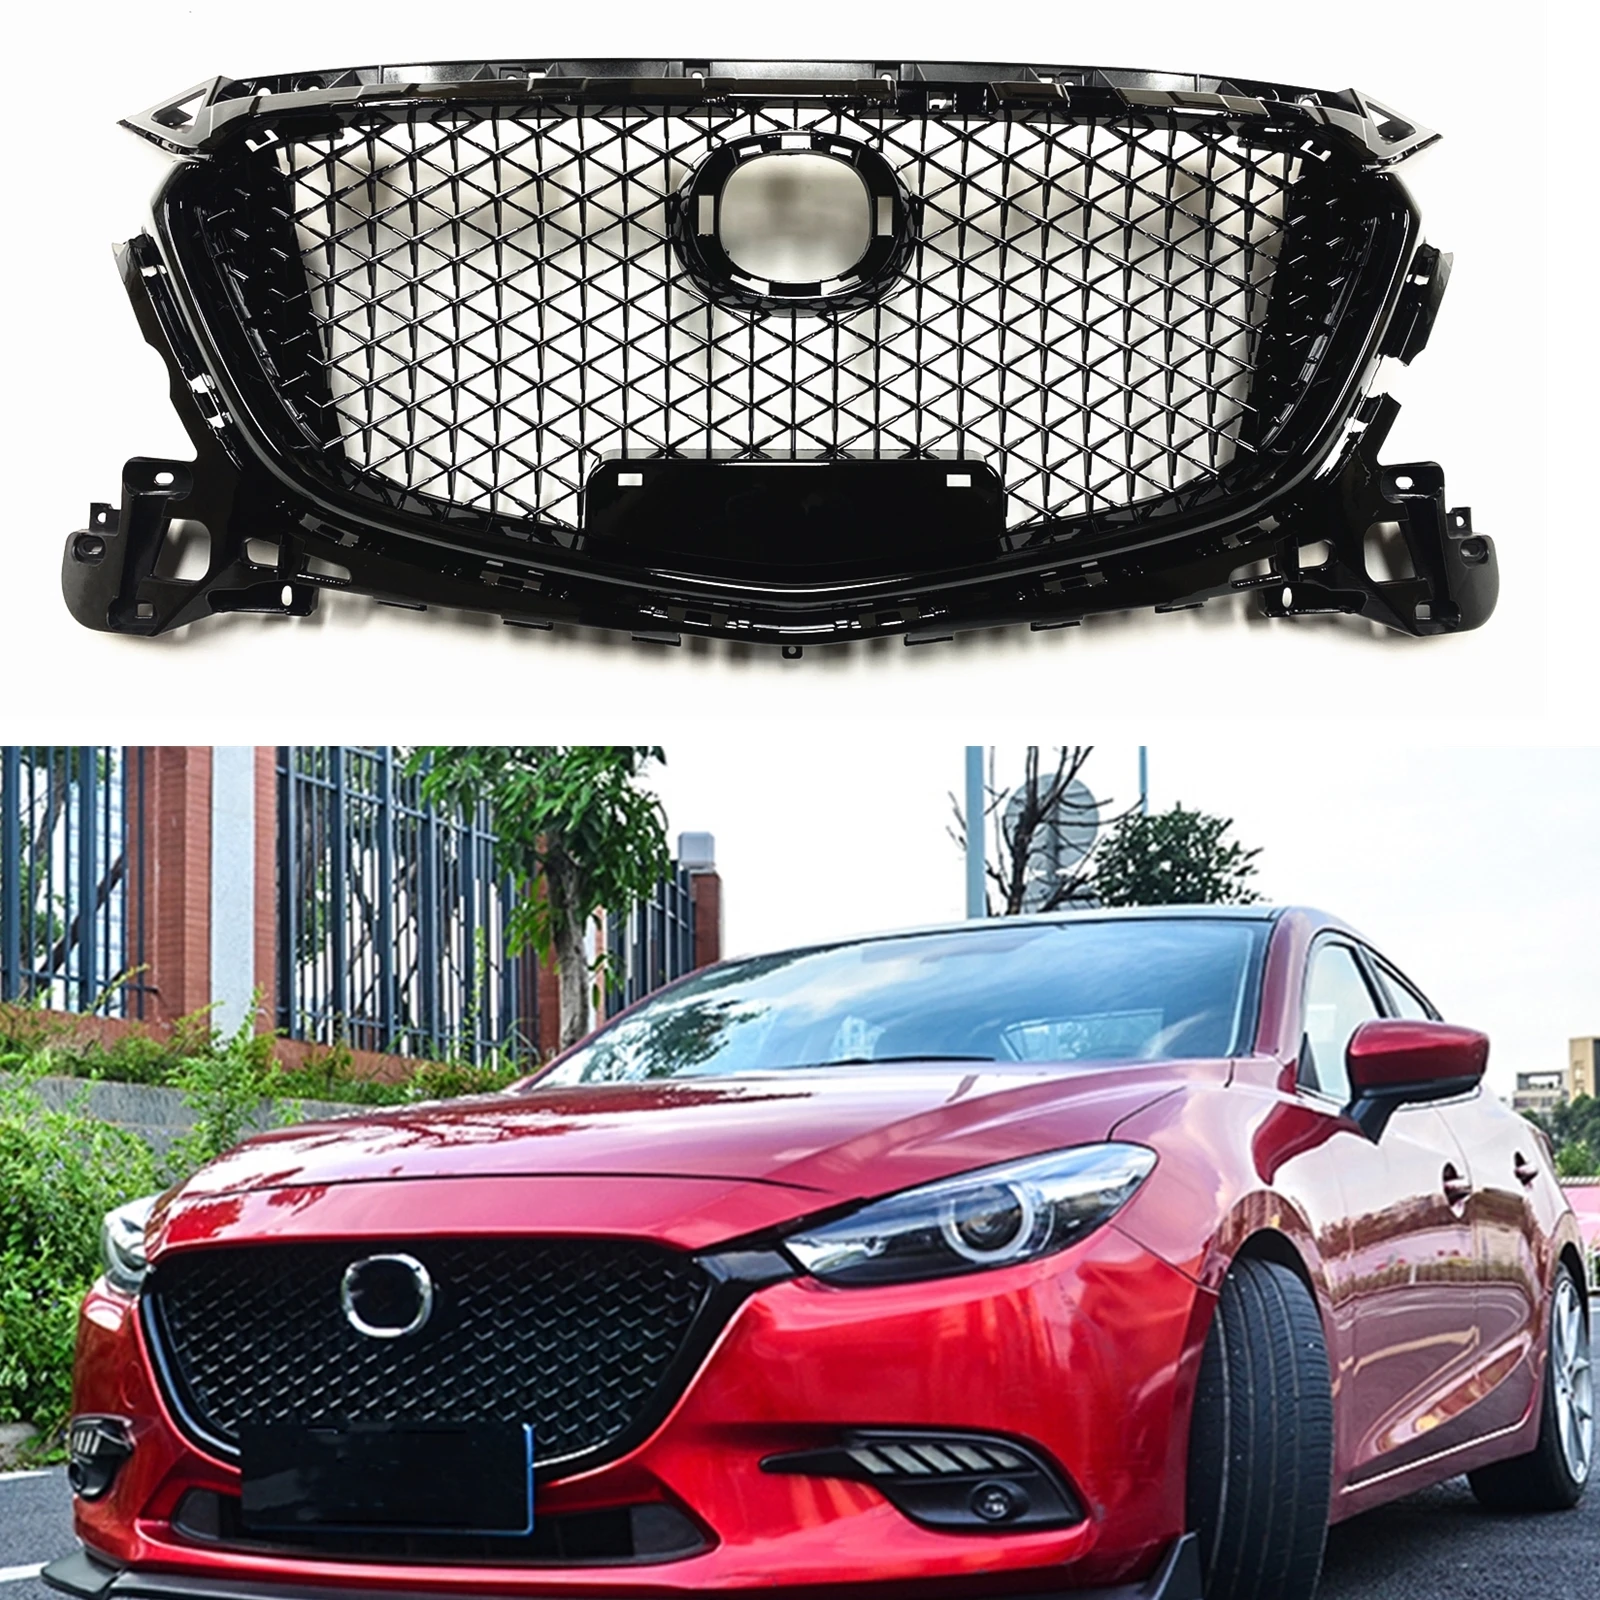 Front Grille Grill For Mazda 3 Axela 2017-2018 Glossy Black Car Upper Bumper Hood Mesh Honeycomb Style Air Grating Body Kit Grid